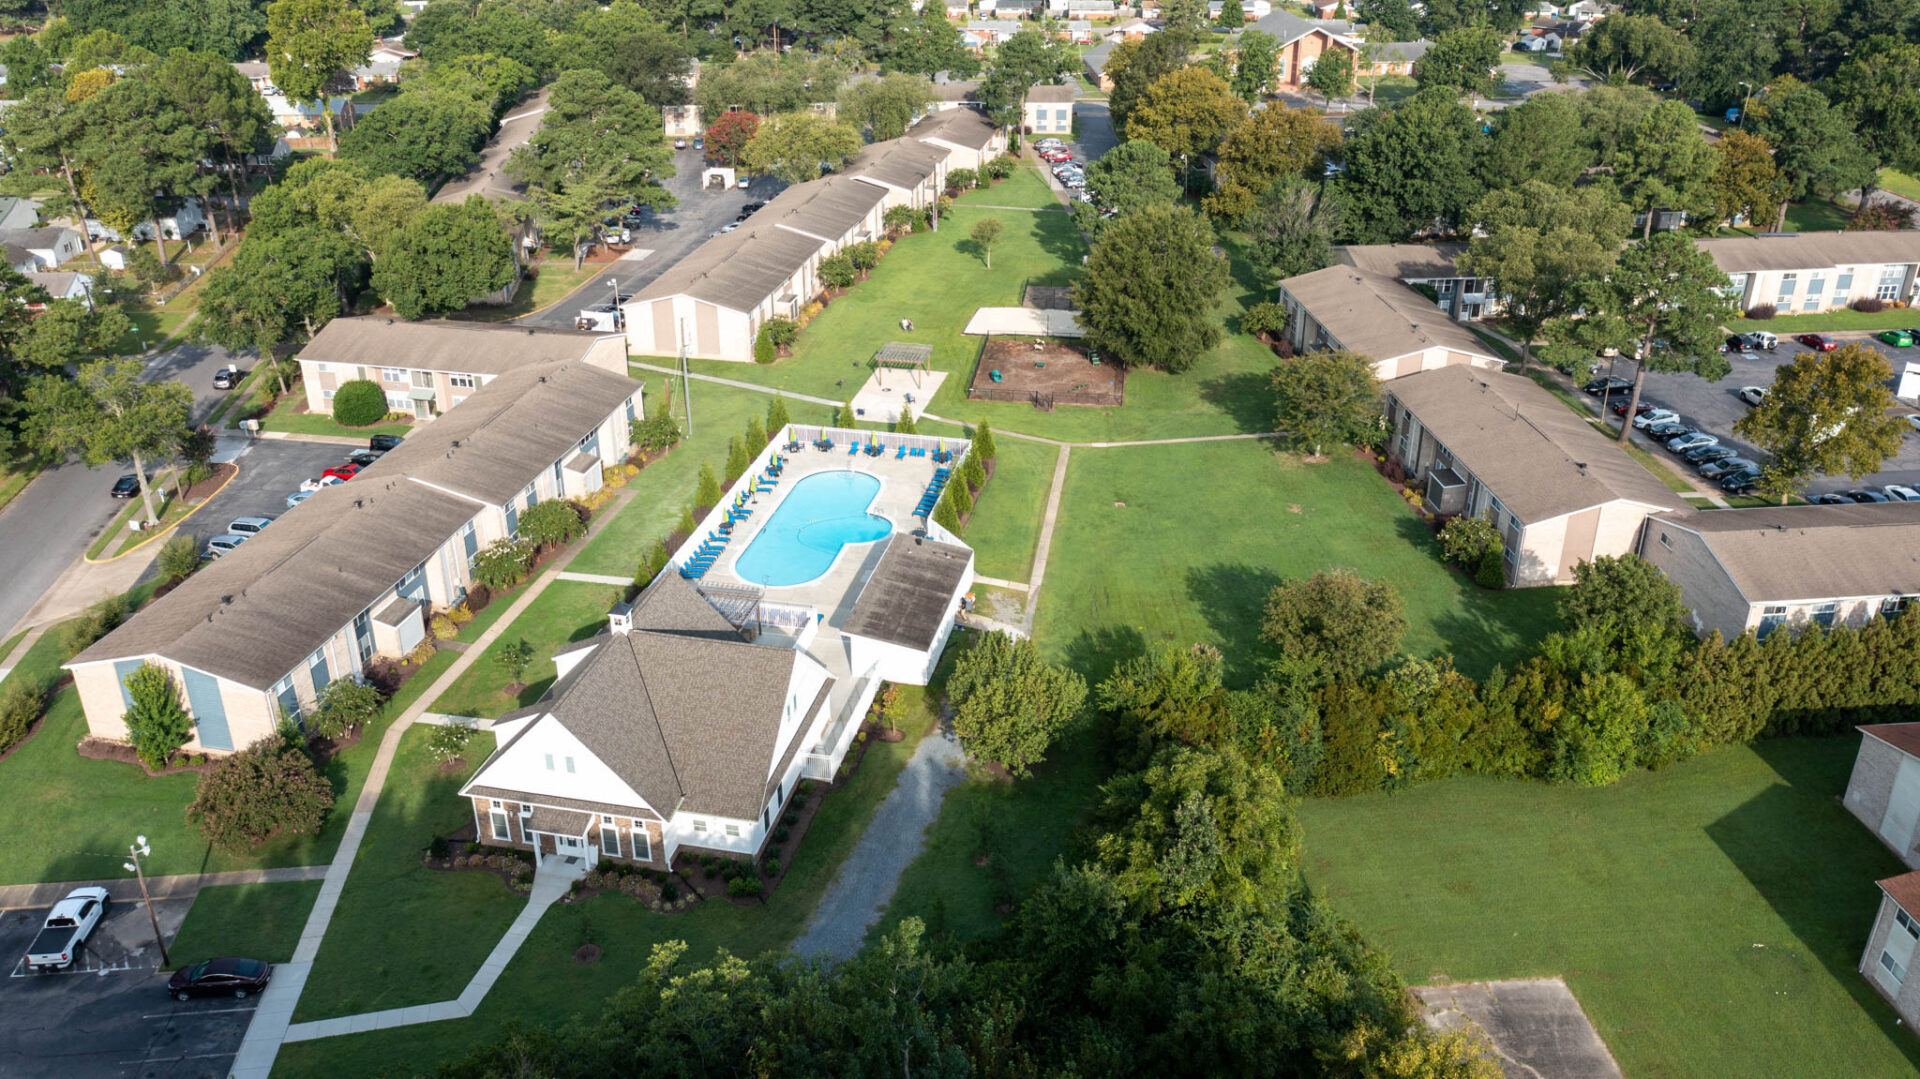 aerial view of apartment complex with pool